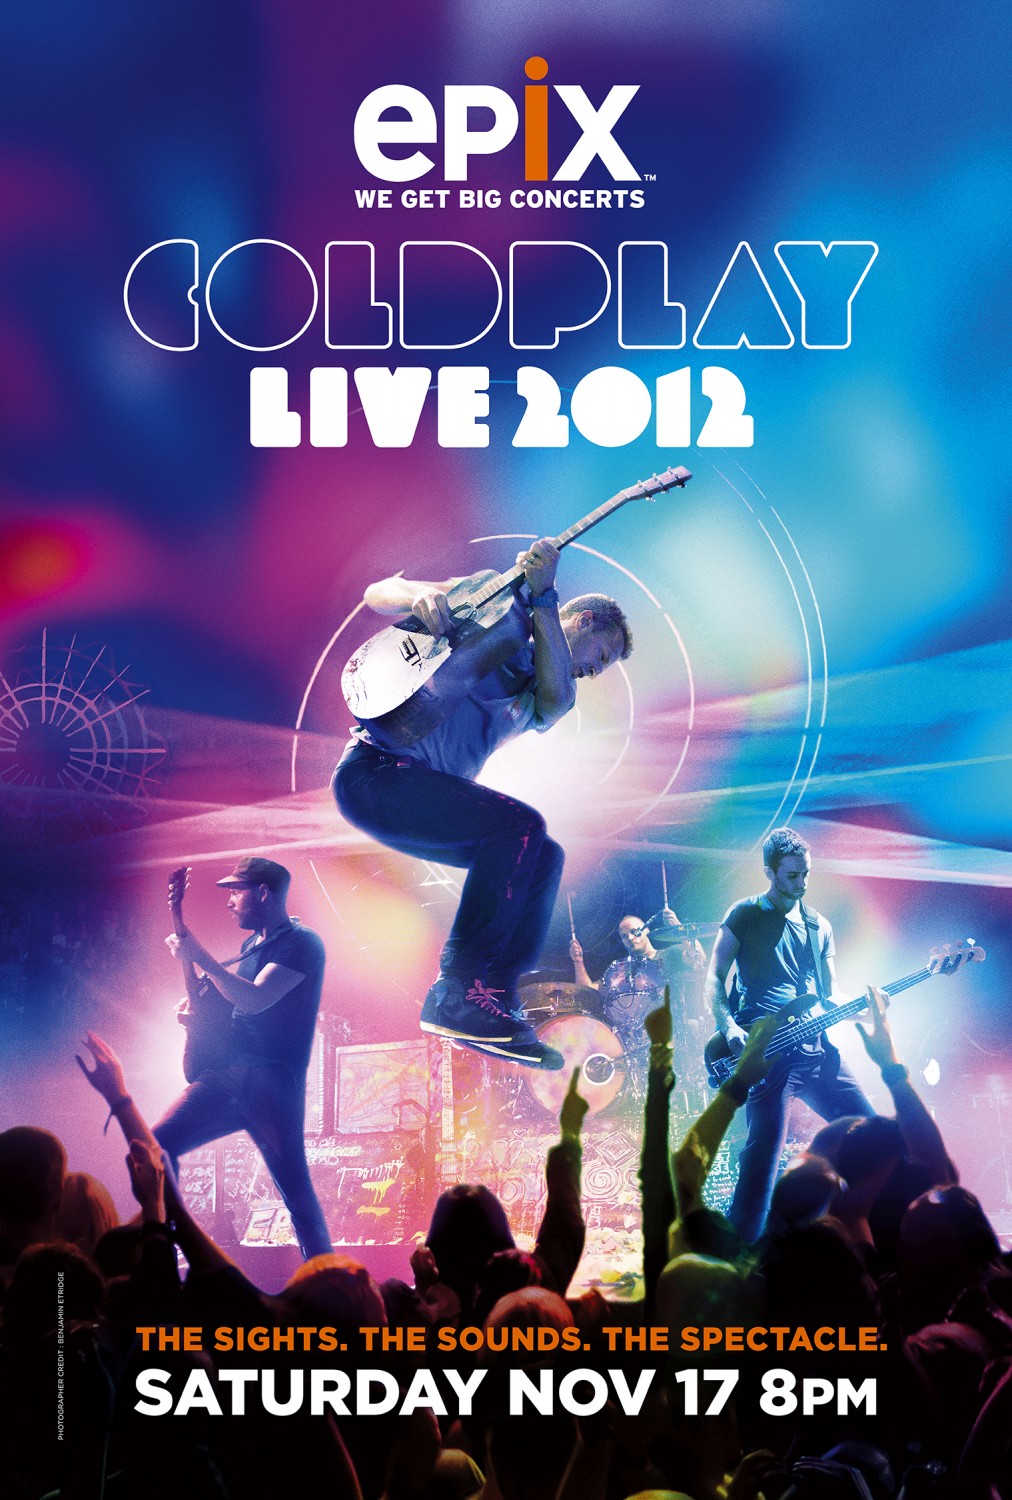 Extra Large TV Poster Image for Coldplay Live 2012 